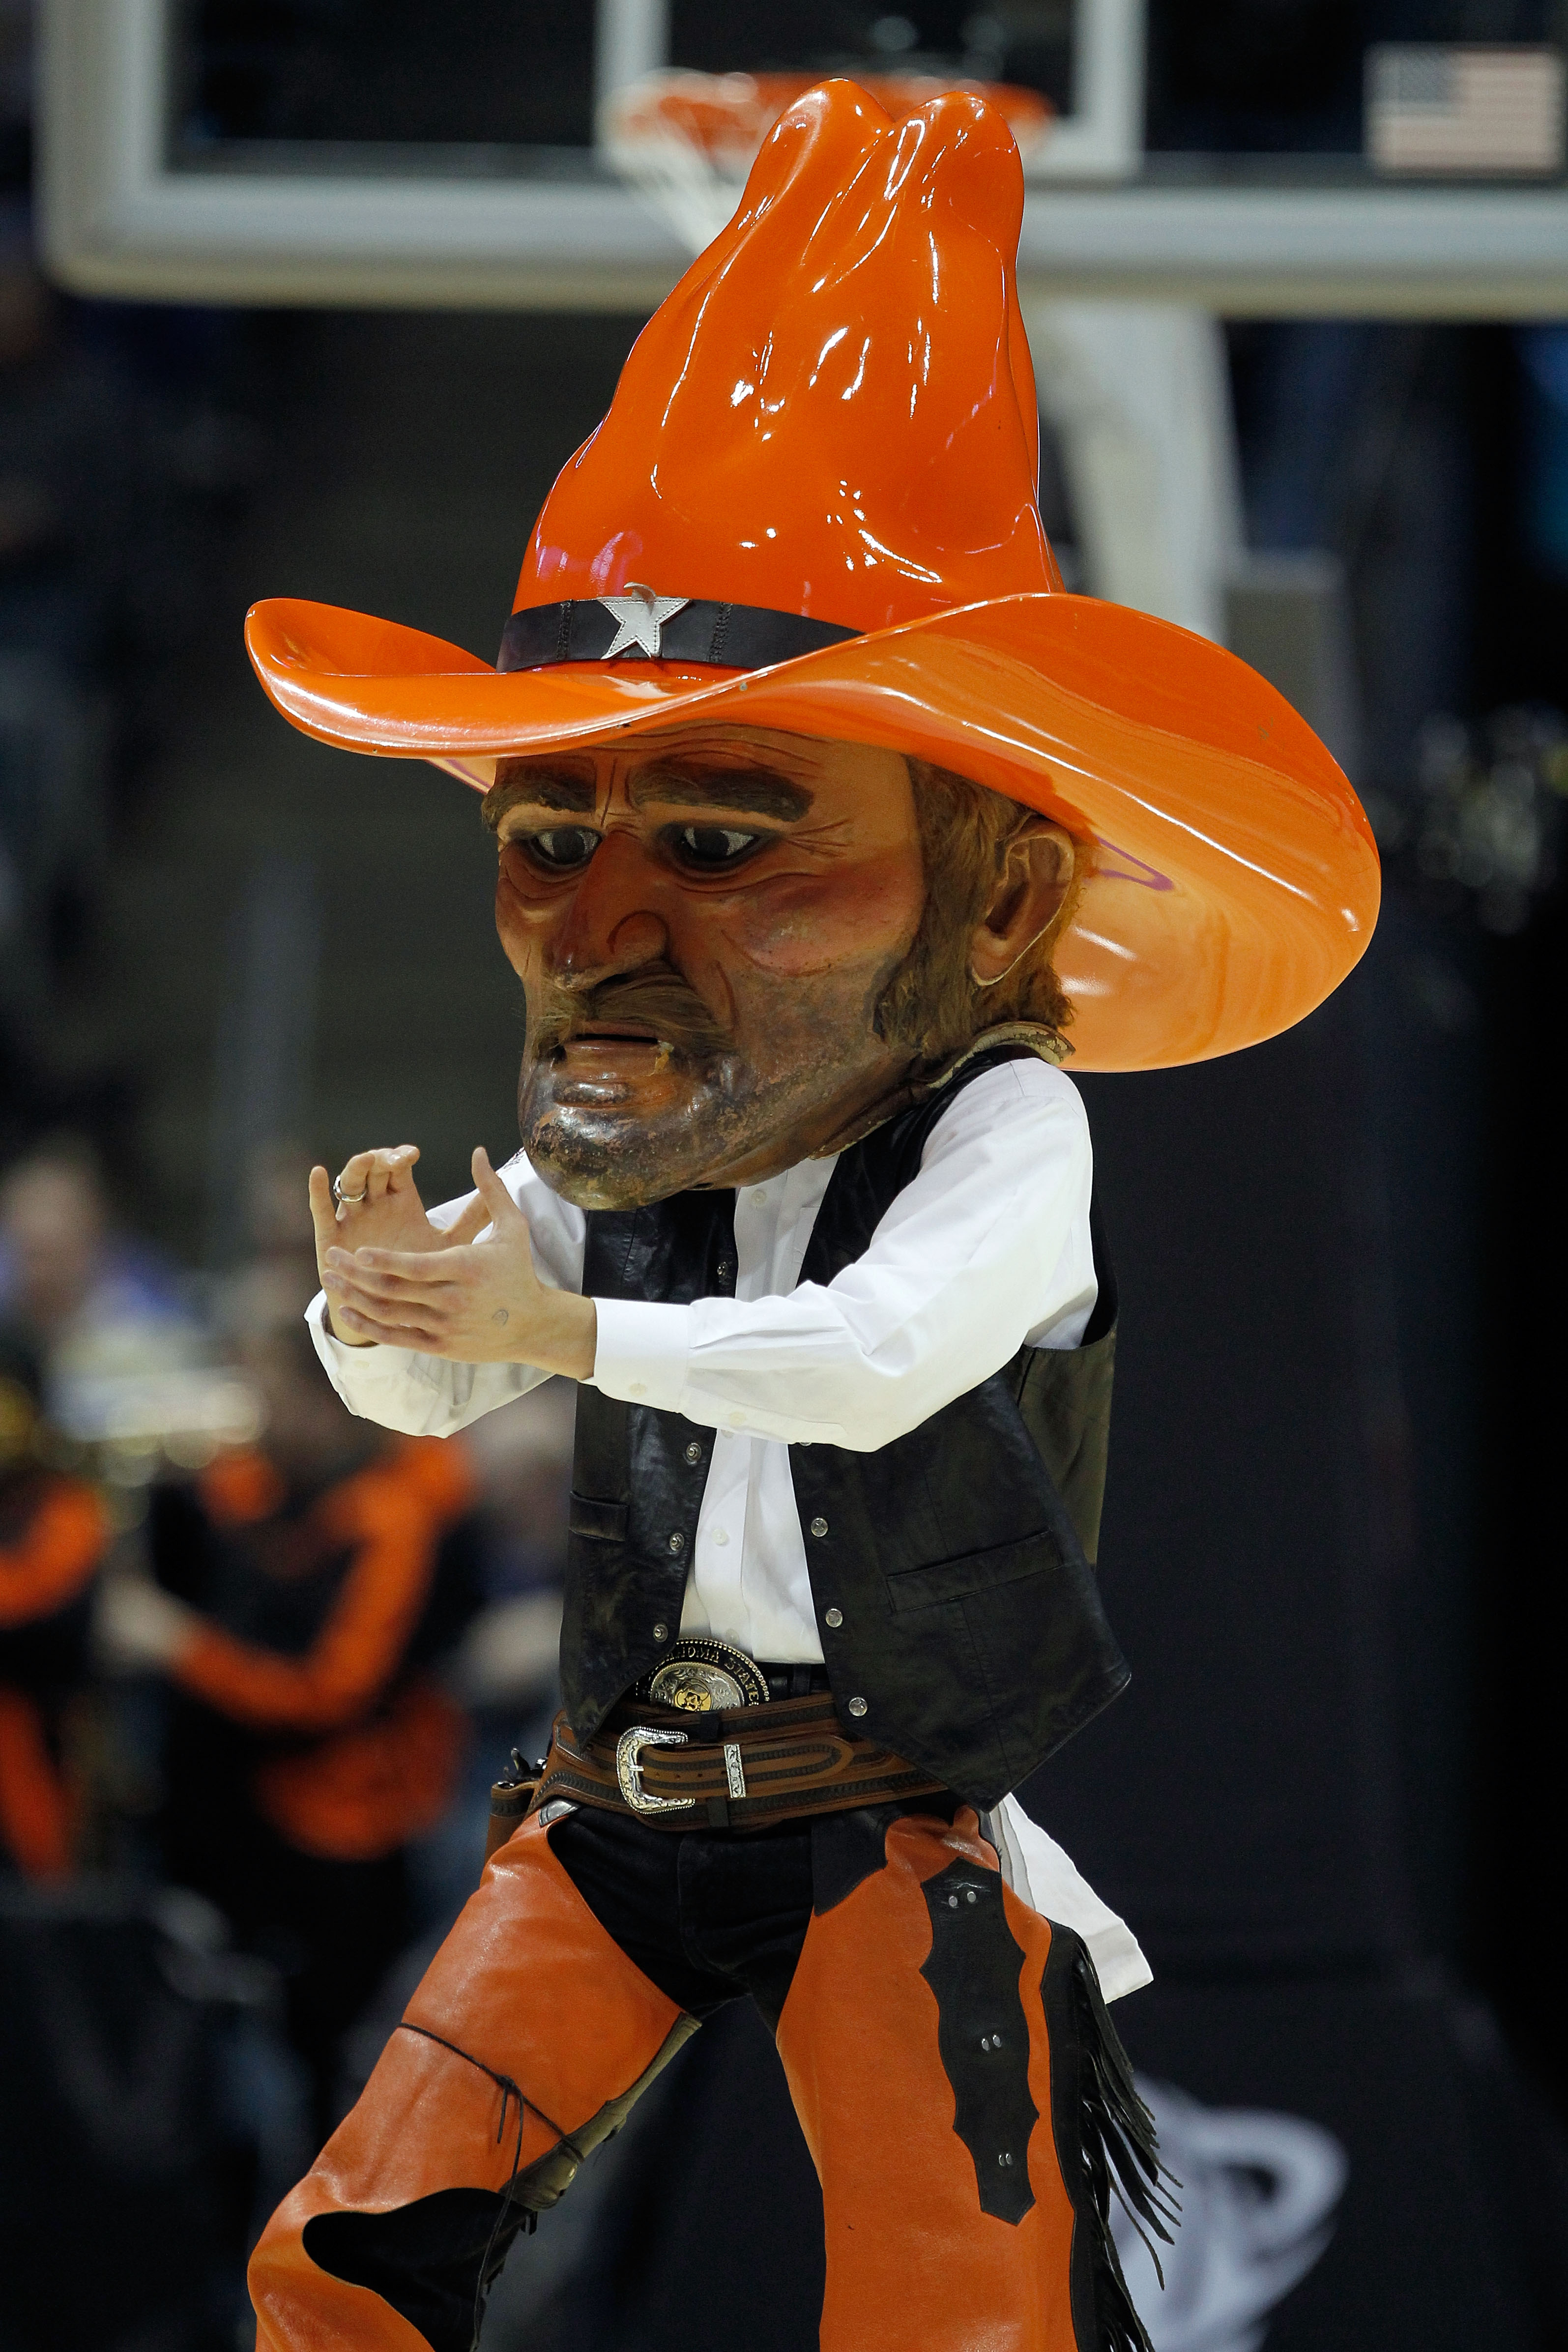 MILWAUKEE - MARCH 19:  The Oklahoma State Cowboys mascot performs during a break in the game against the Georgia Tech Yellow Jackets during the first round of the 2010 NCAA men's basketball tournament at the Bradley Center on March 19, 2010 in Milwaukee,